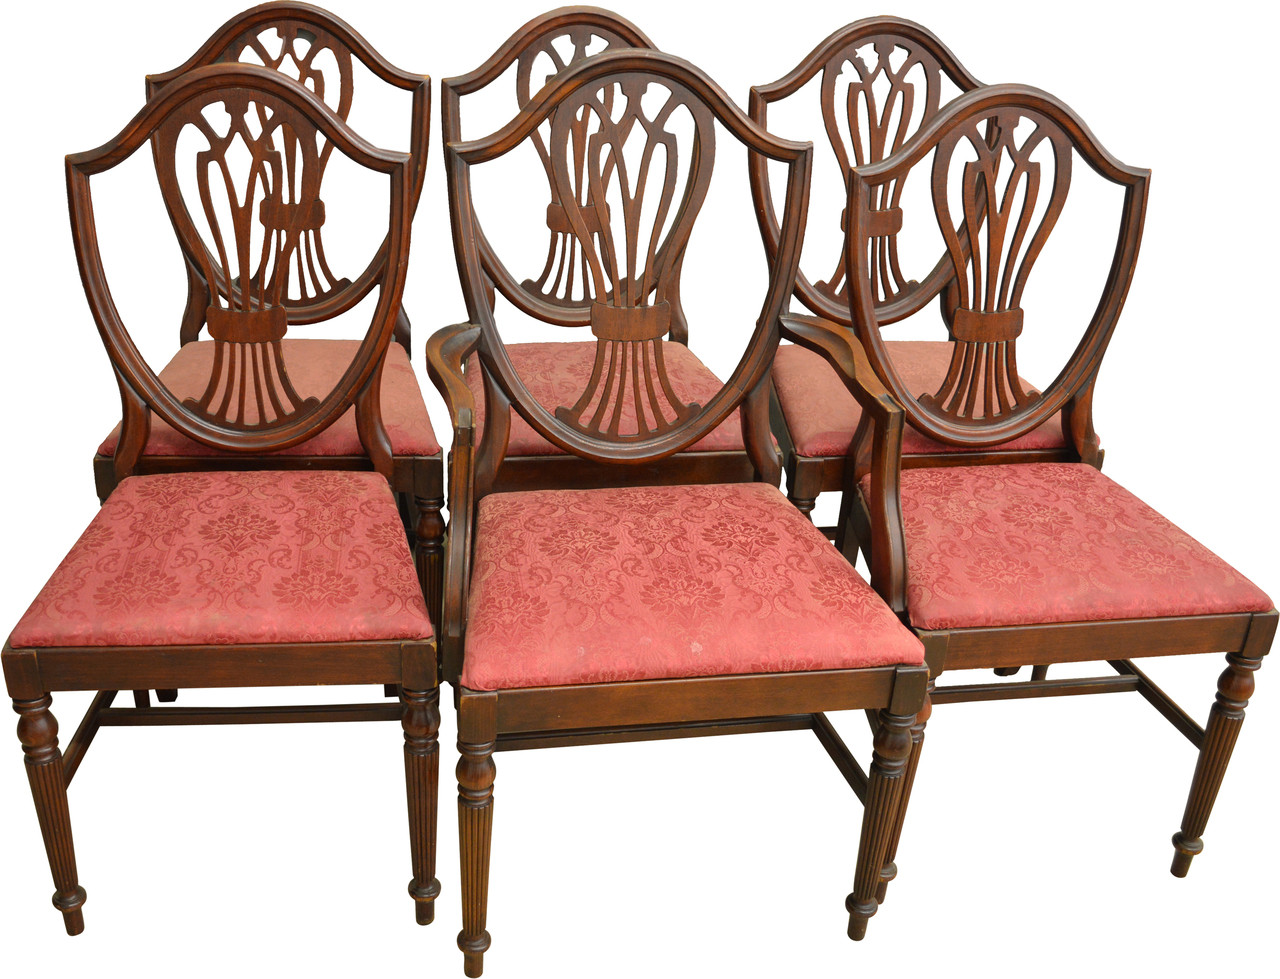 Sold Set Of 6 Mahogany Shield Back Dining Chairs Maine Antique Furniture